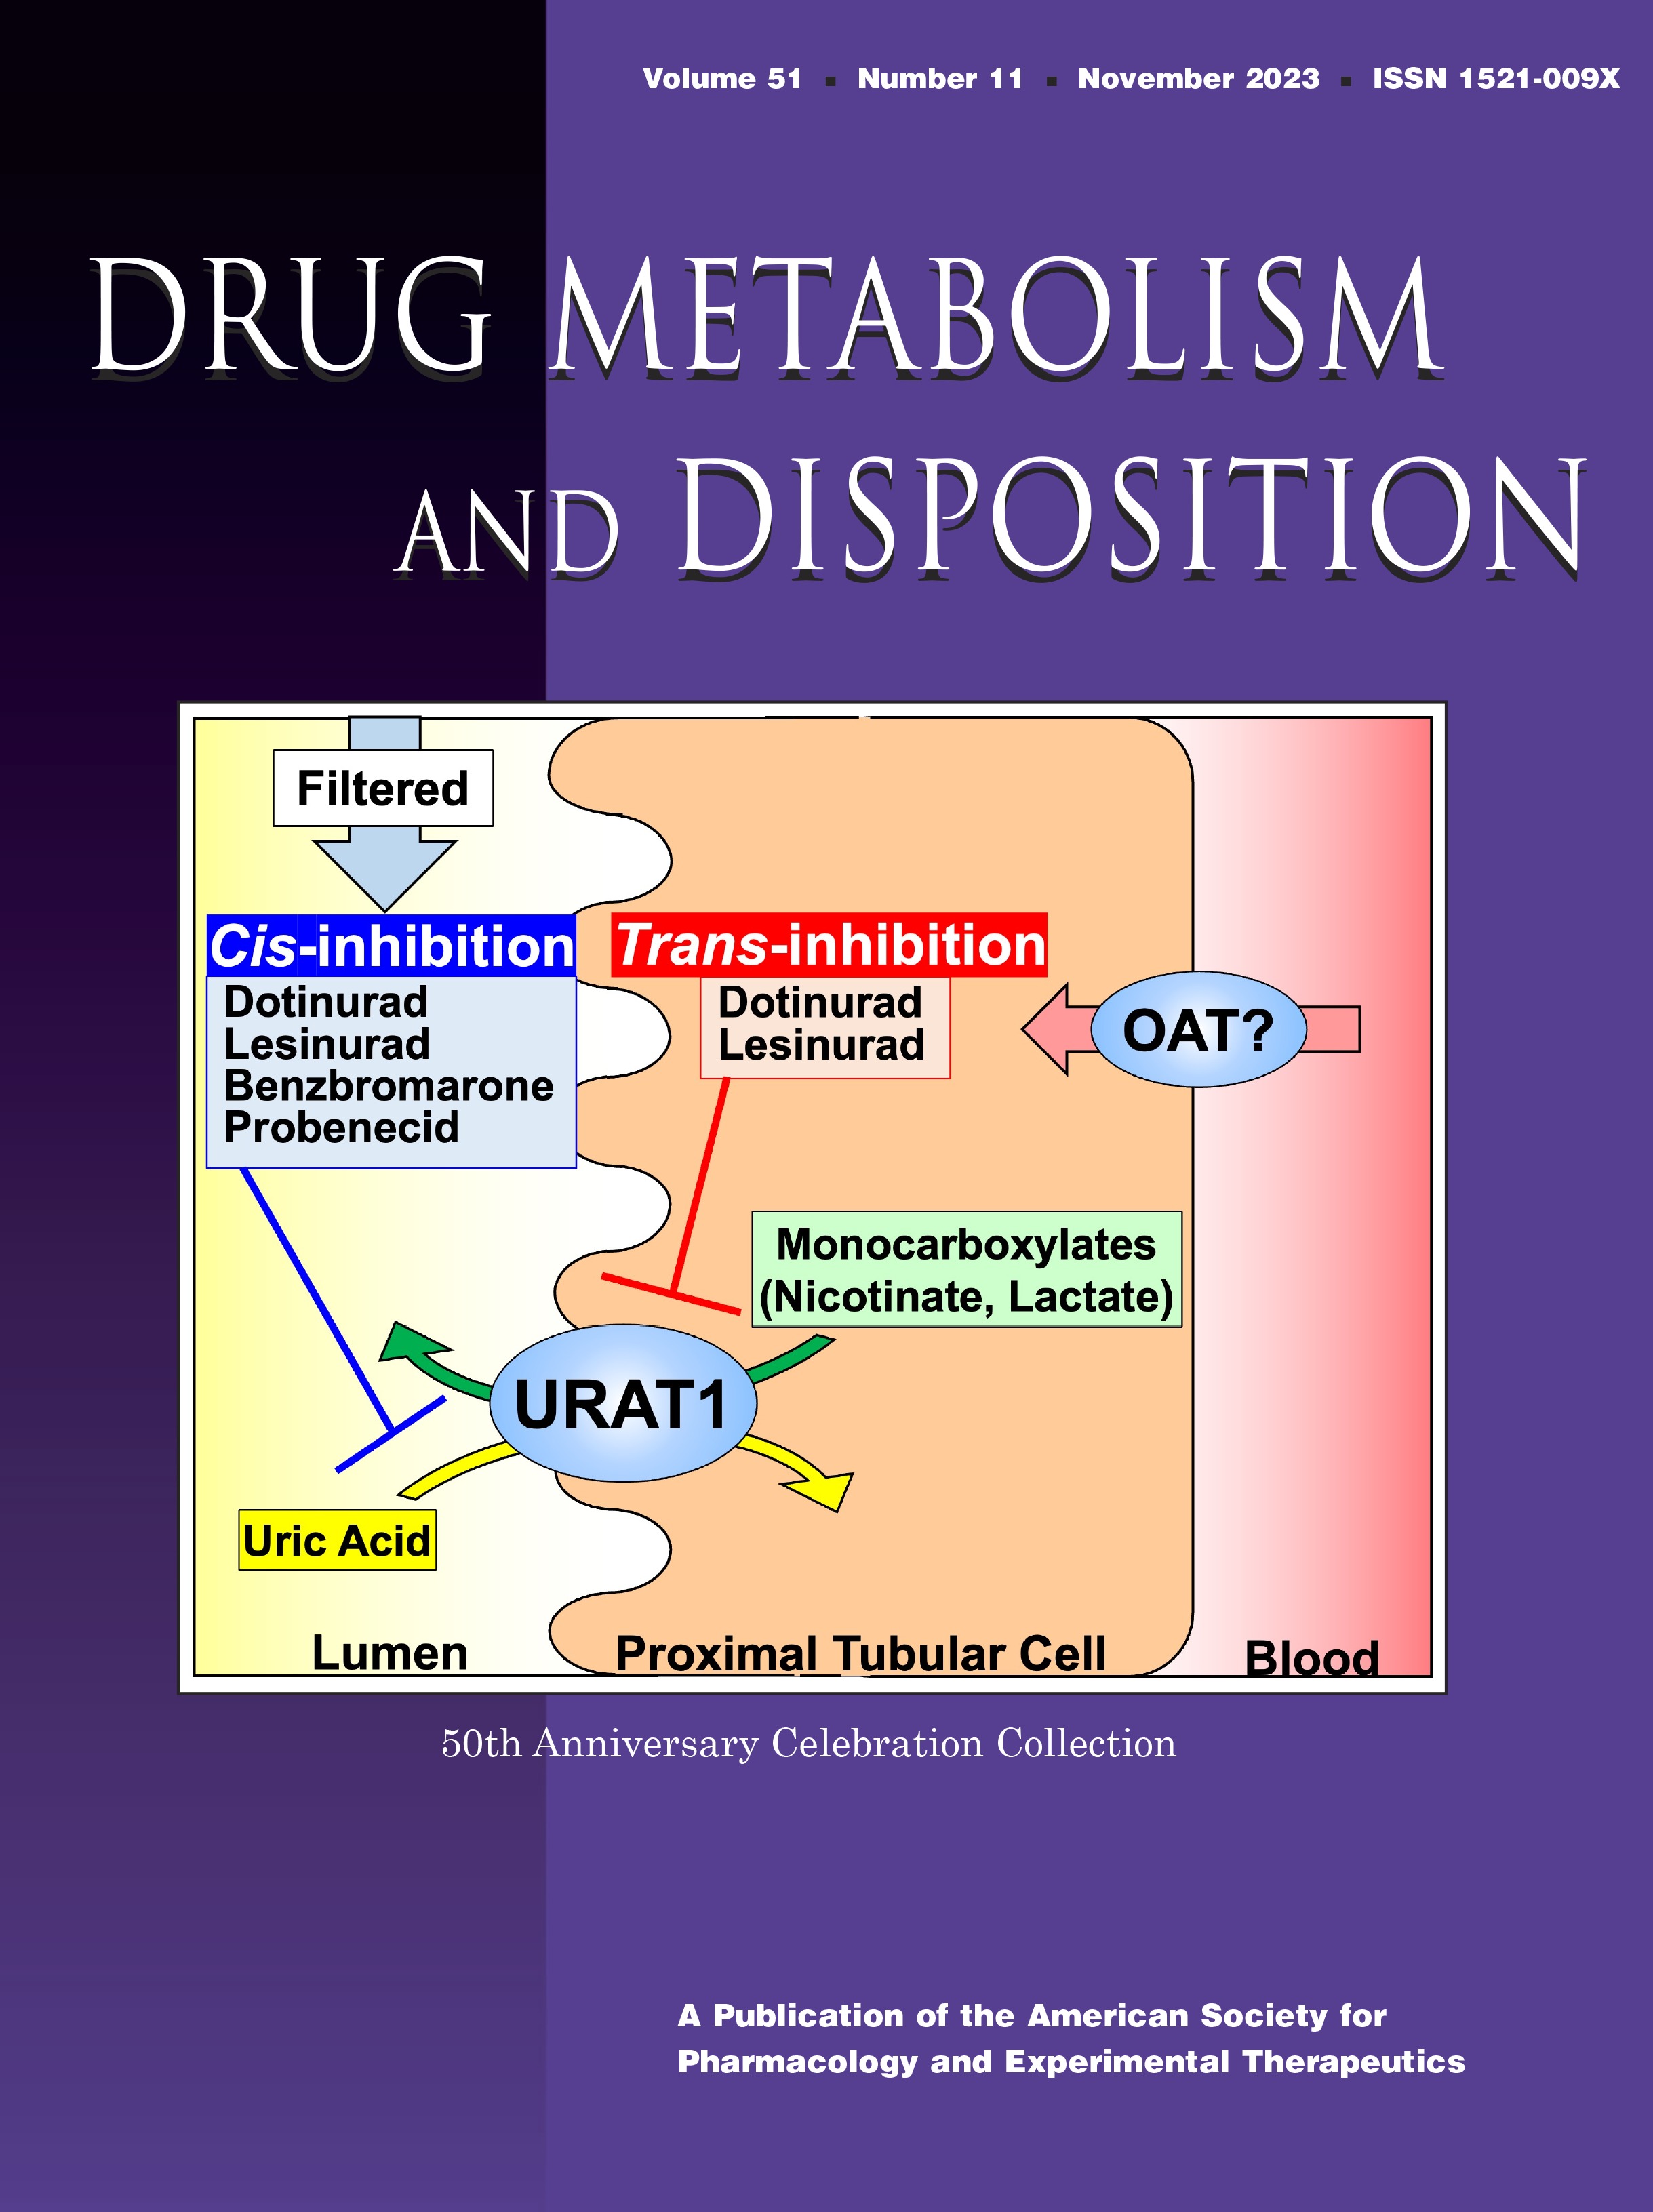 Metabolism and Excretion of Therapeutic Peptides: Current Industry Practices, Perspectives, and Recommendations [50th Anniversary Celebration Collection-Minireview]